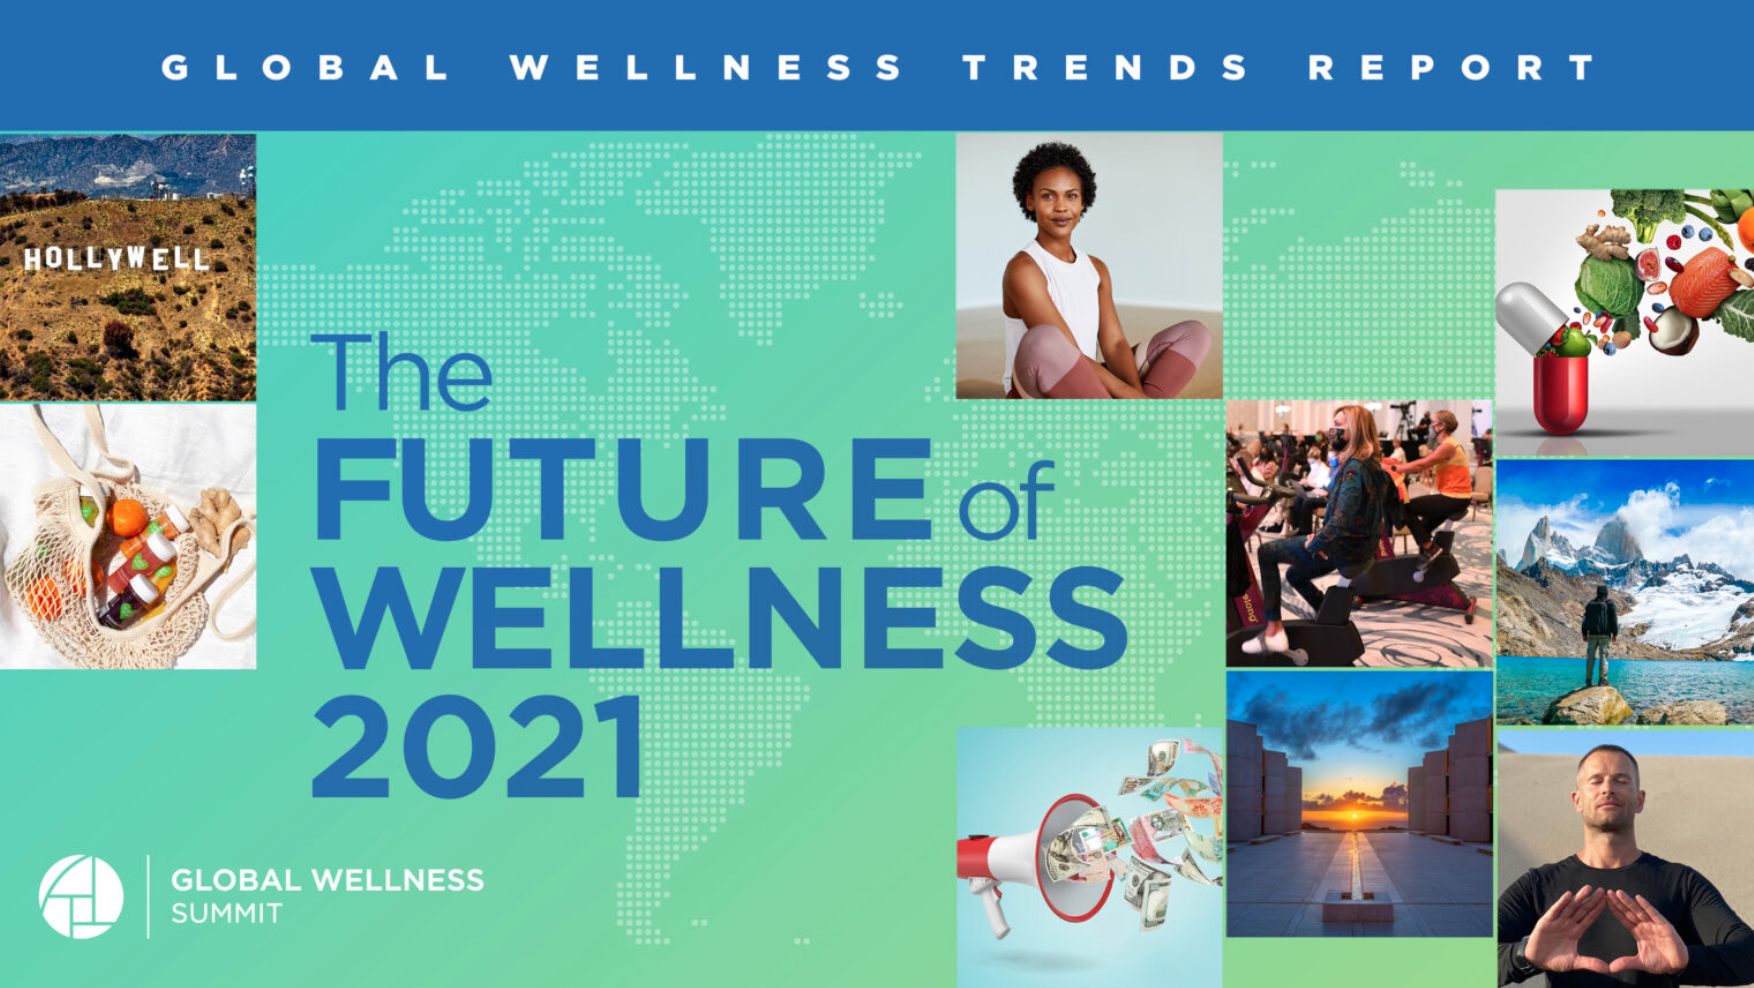 The Global Wellness Summit releases 'The Future of Wellness 2021' trends report